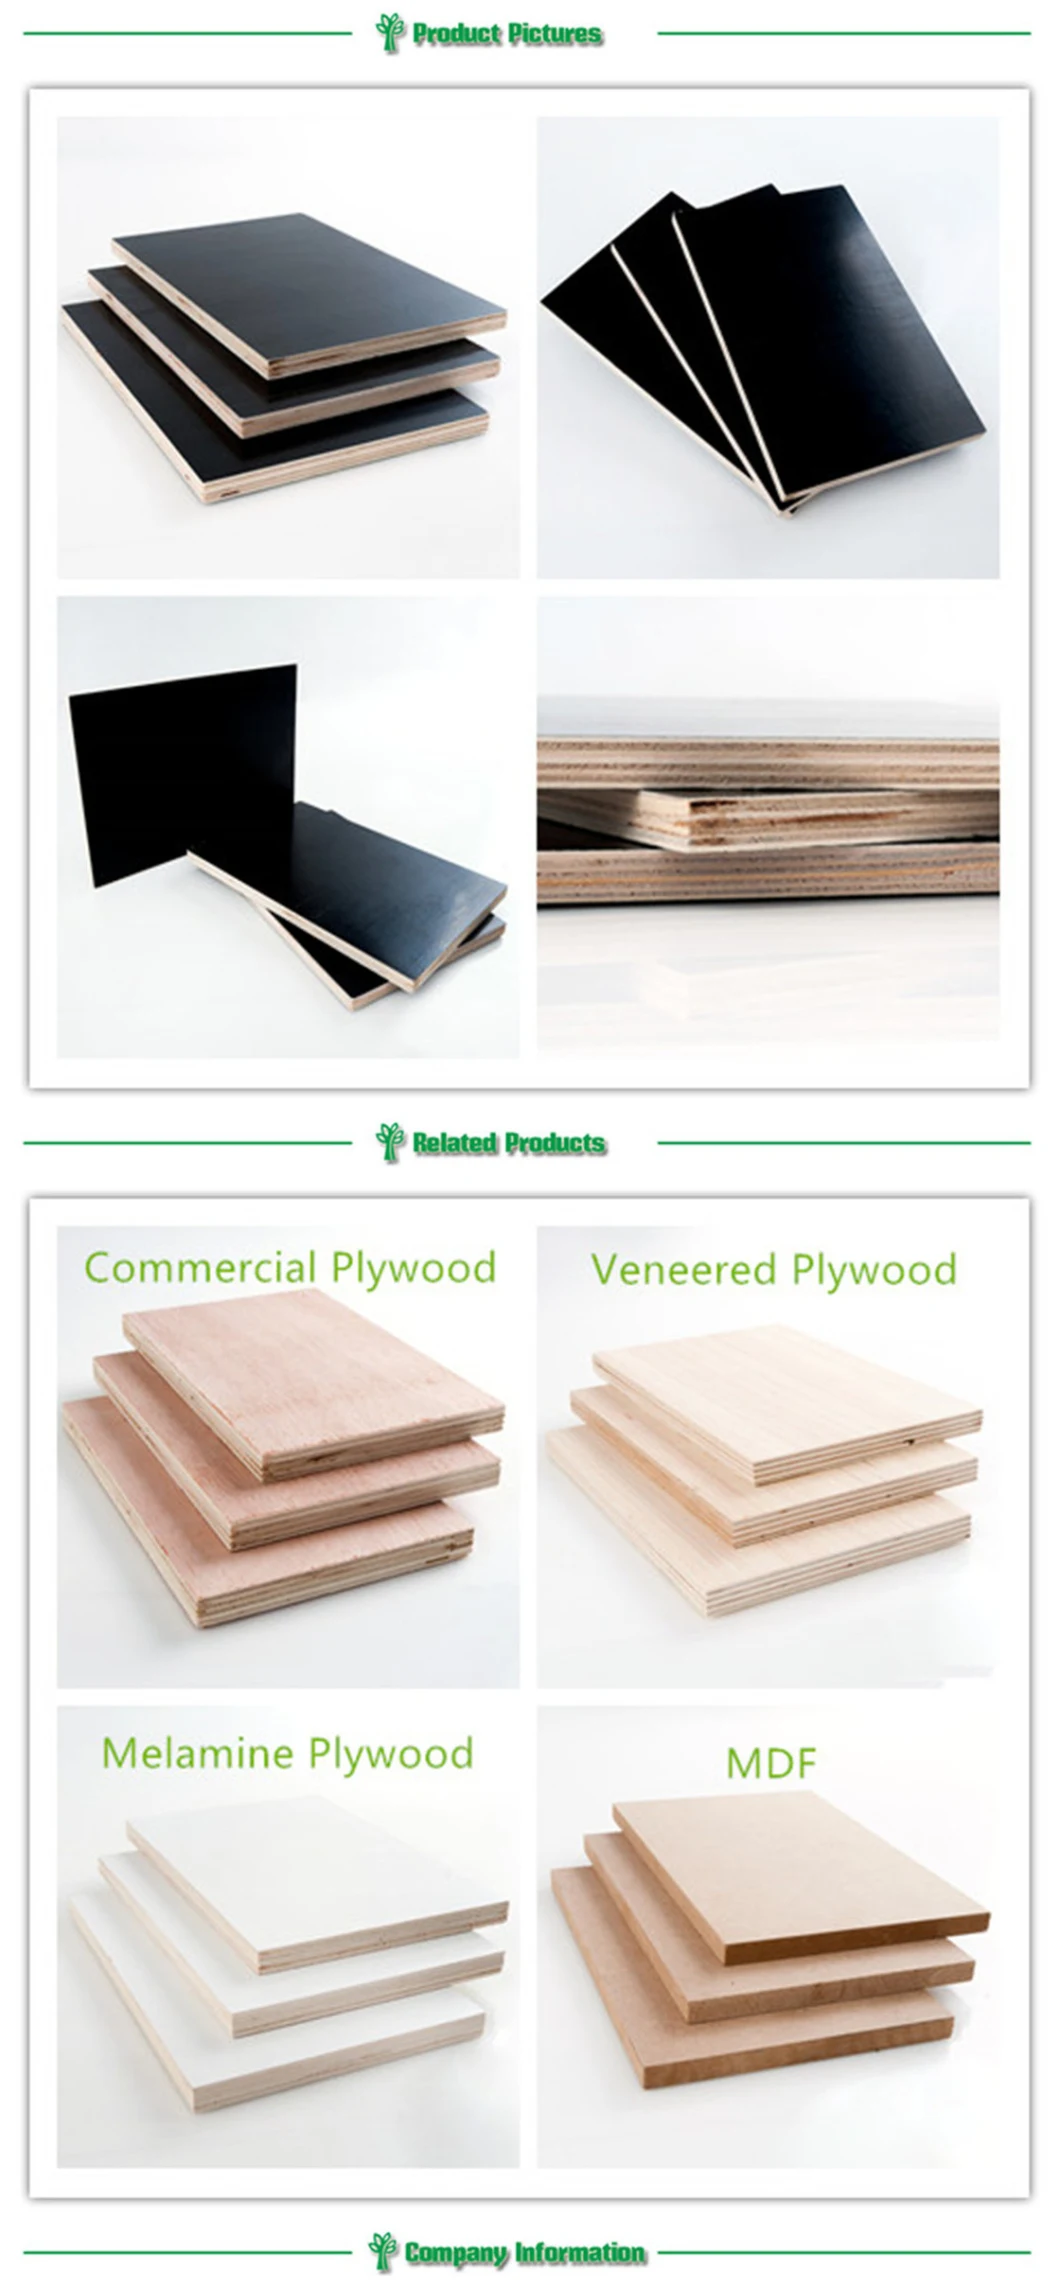 Film Faced Plywood for Construction Concrete Formwork Phenolic Plywood